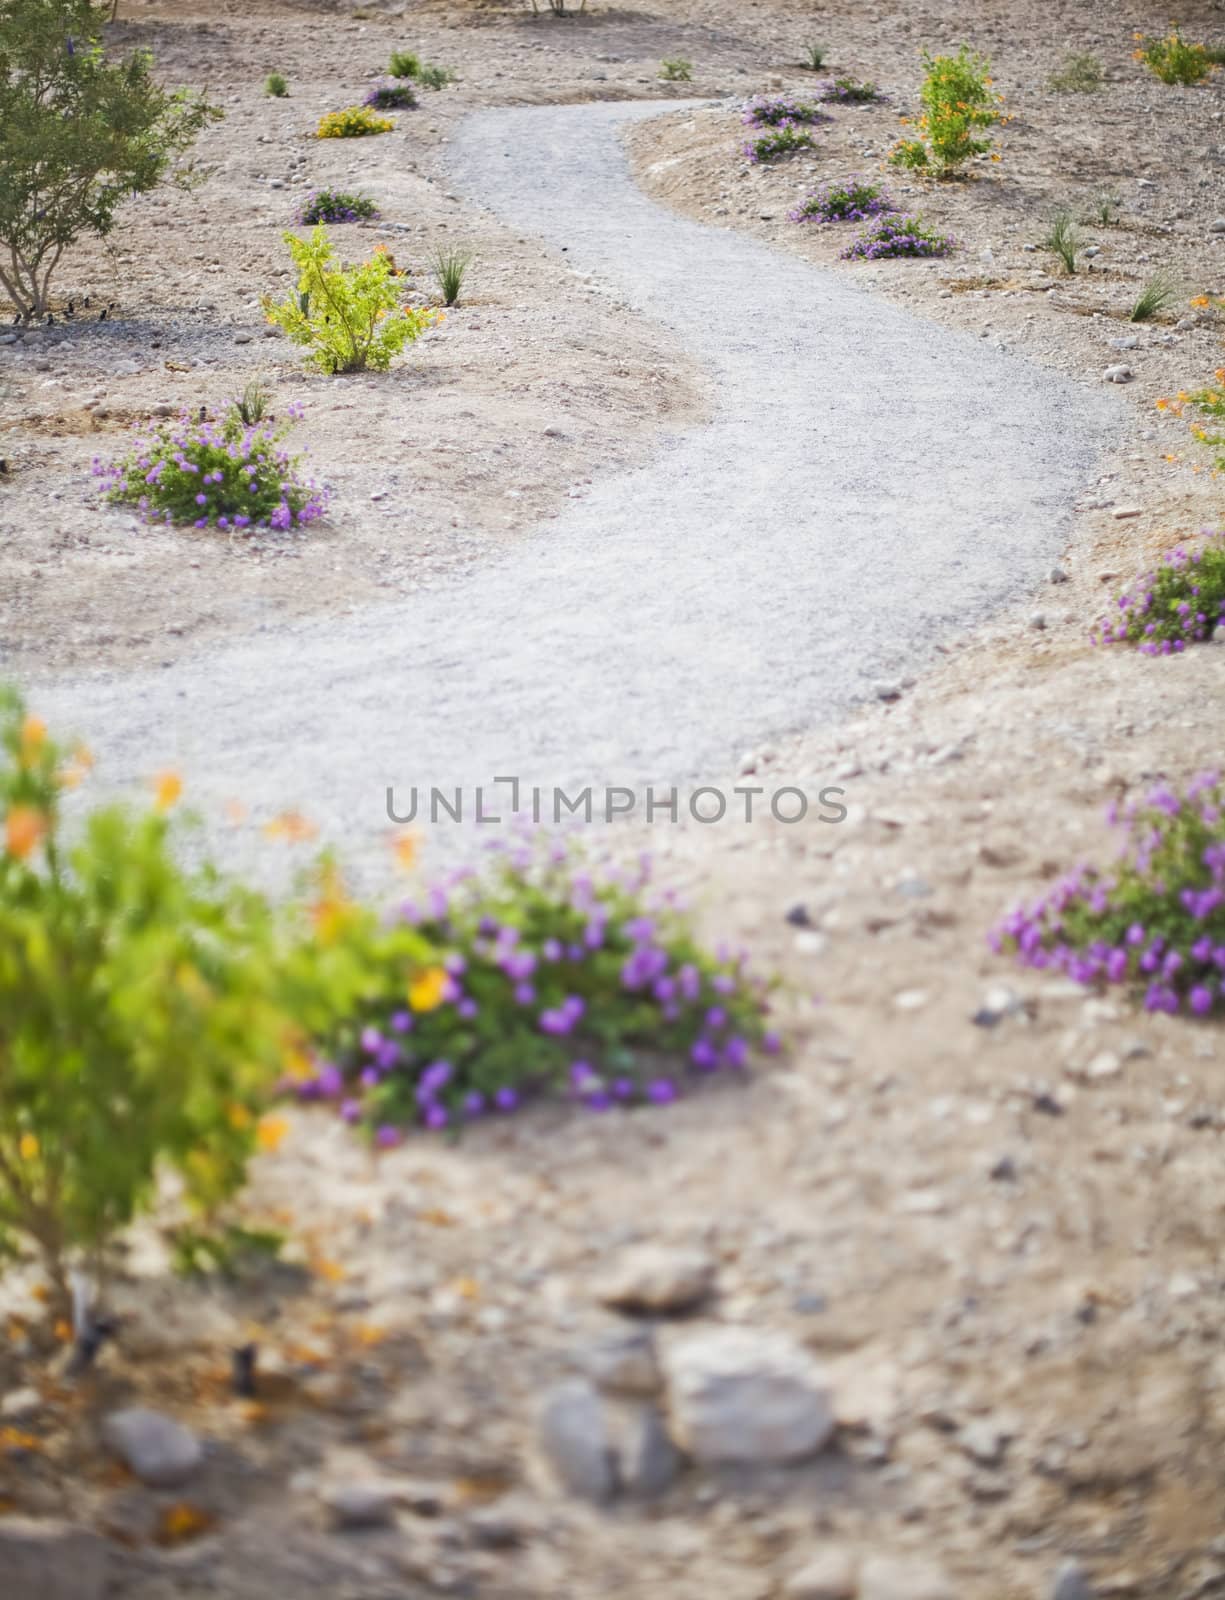 desert path with a winding, lonely path leading through the desert with landscaped flowers and plants on the side of the road